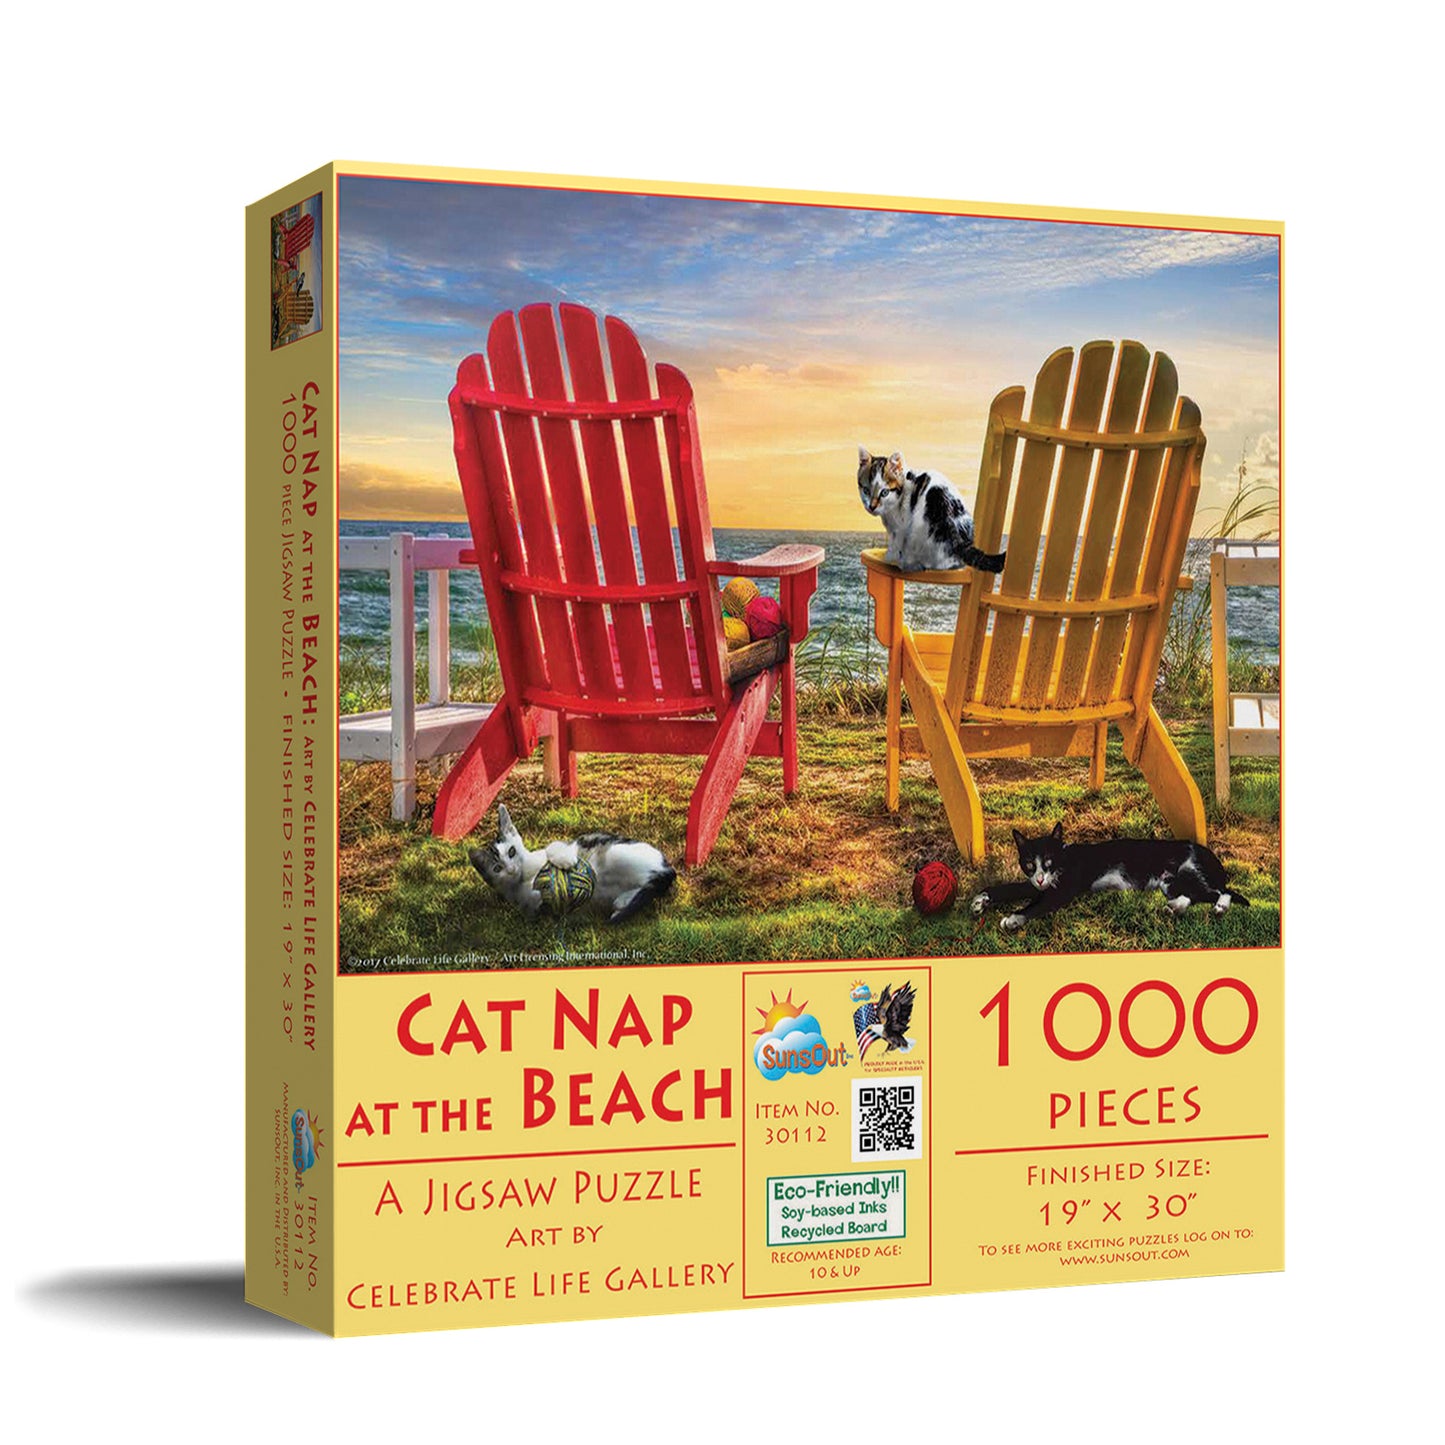 Cat Nap at the Beach - 1000 Piece Jigsaw Puzzle